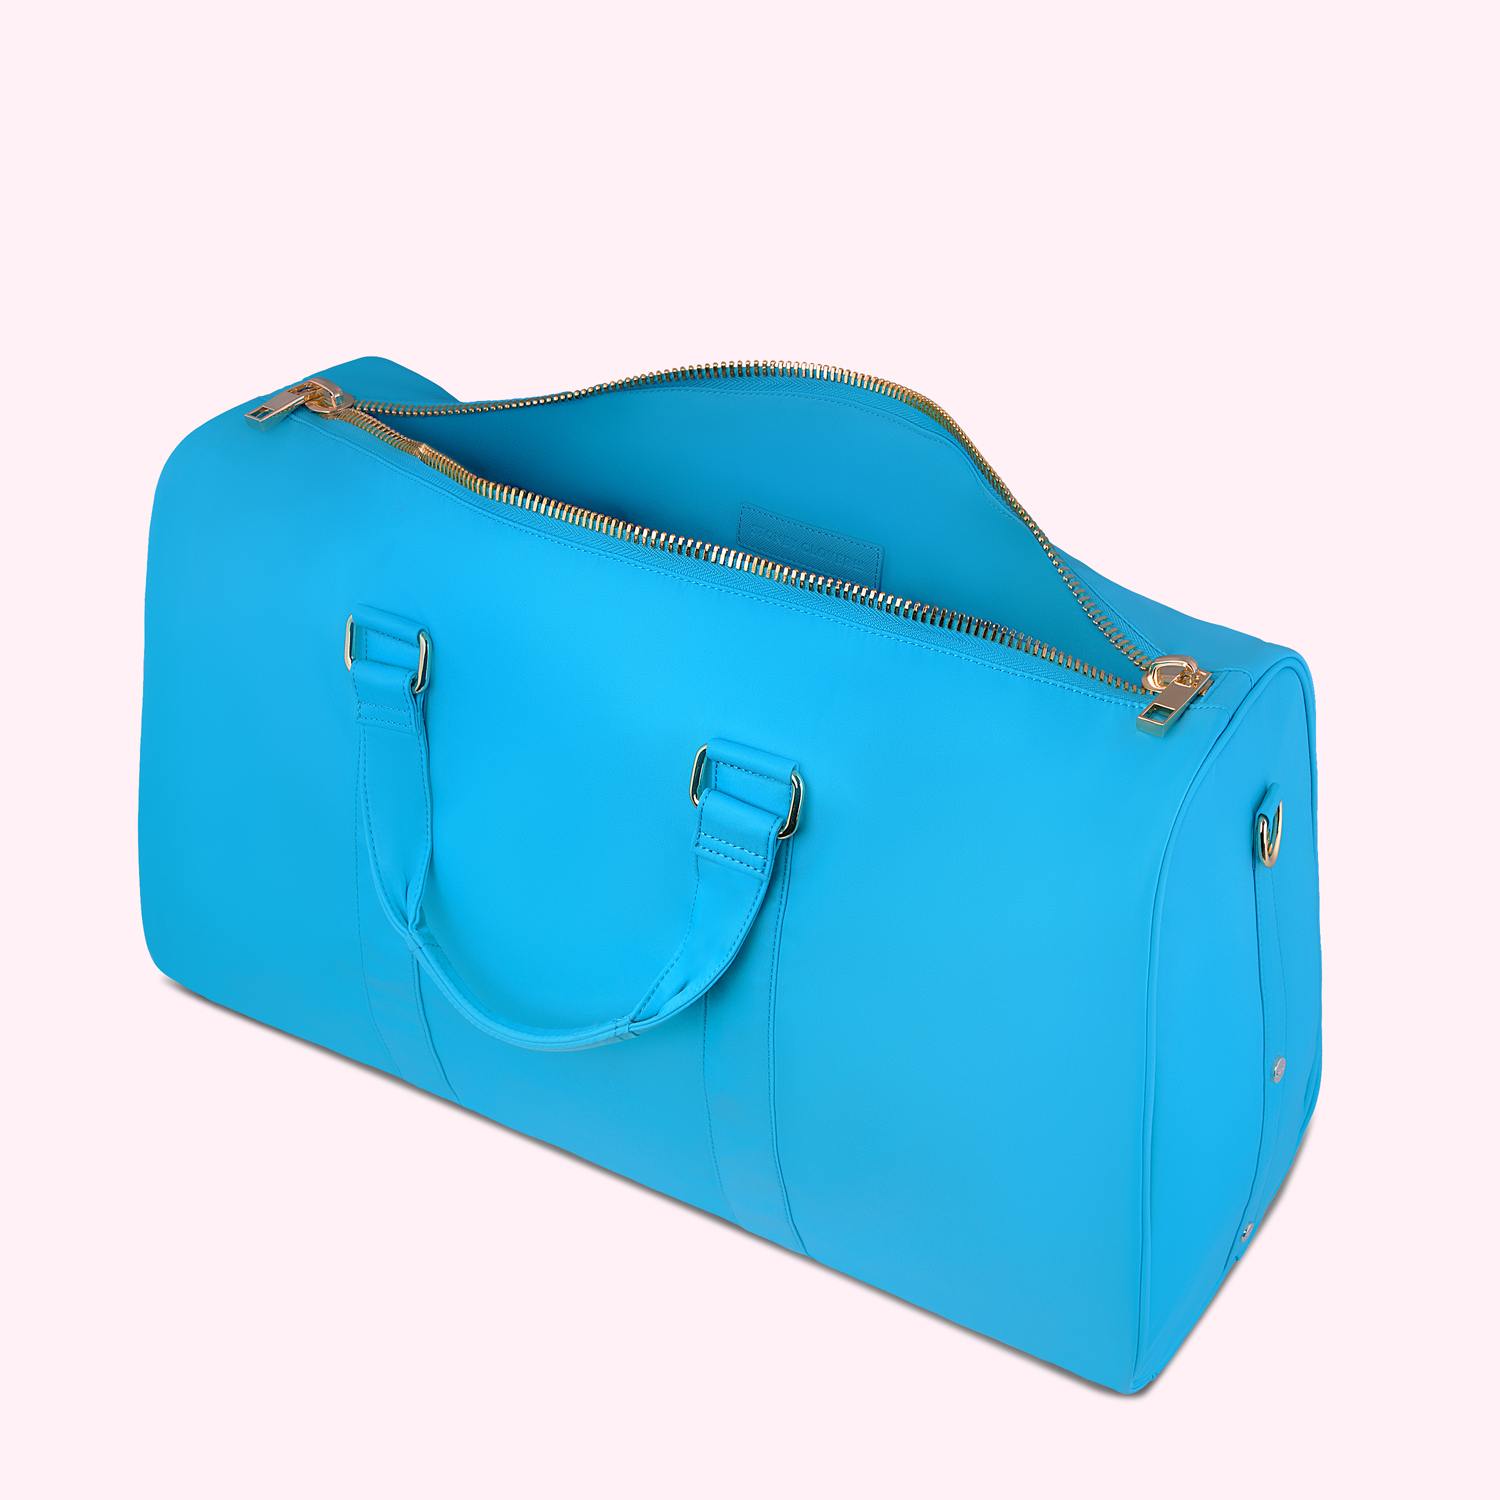 Blue sky and clouds Duffle Bag by LebensART Photography